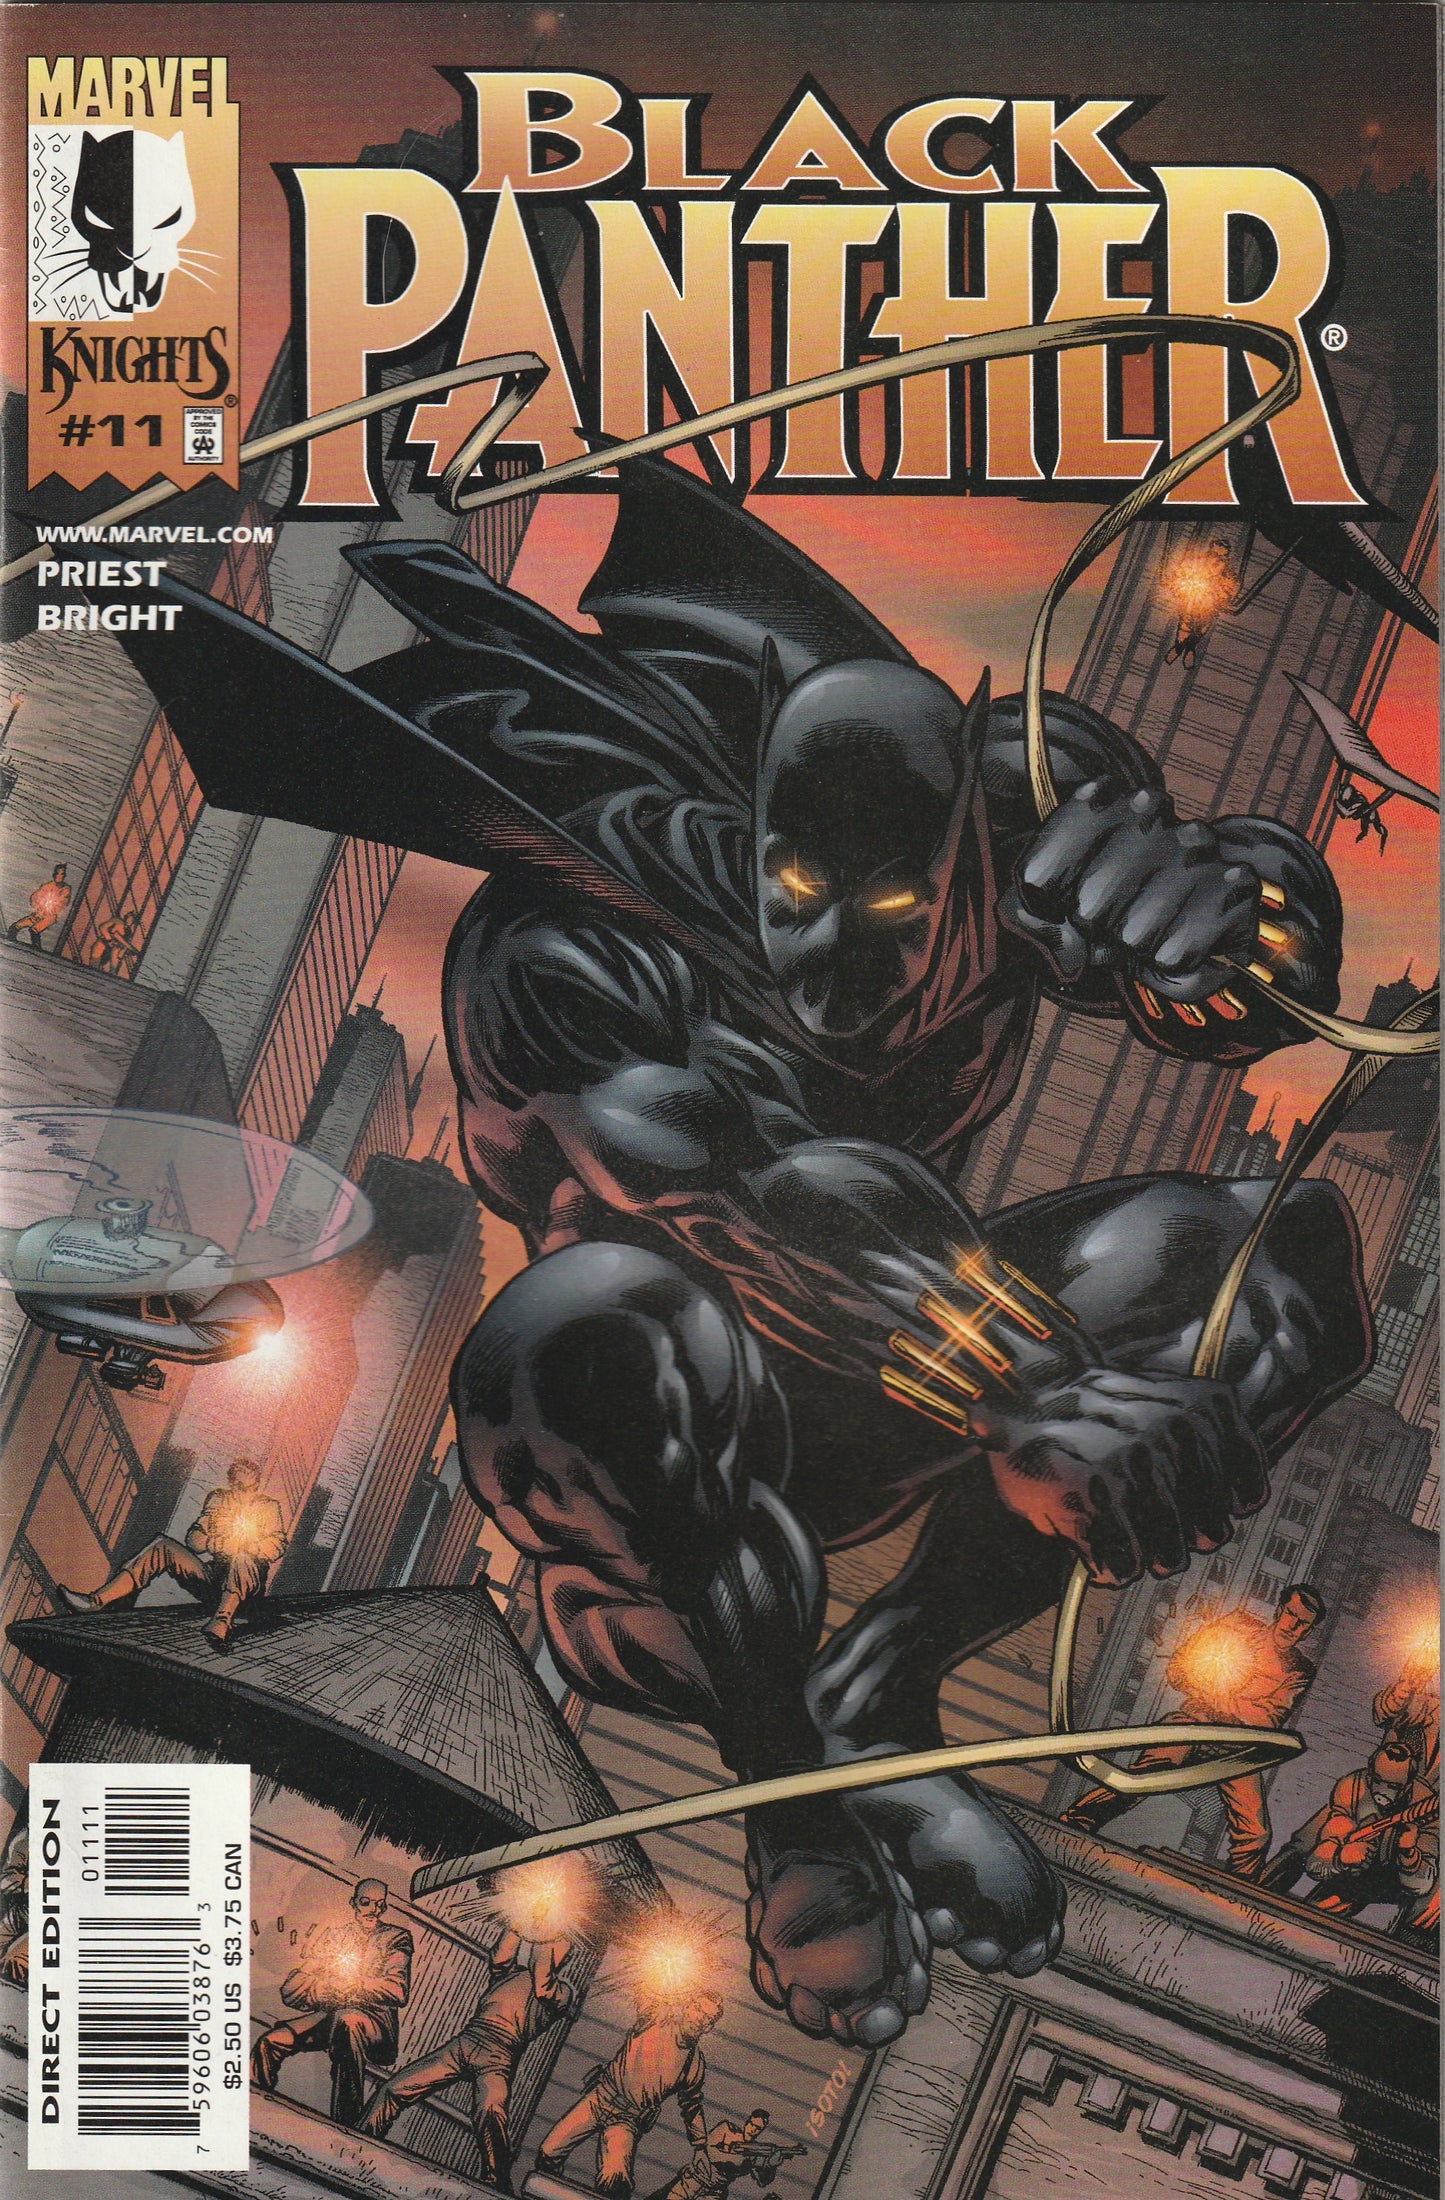 Black Panther #11 (1999) - Marvel Knights